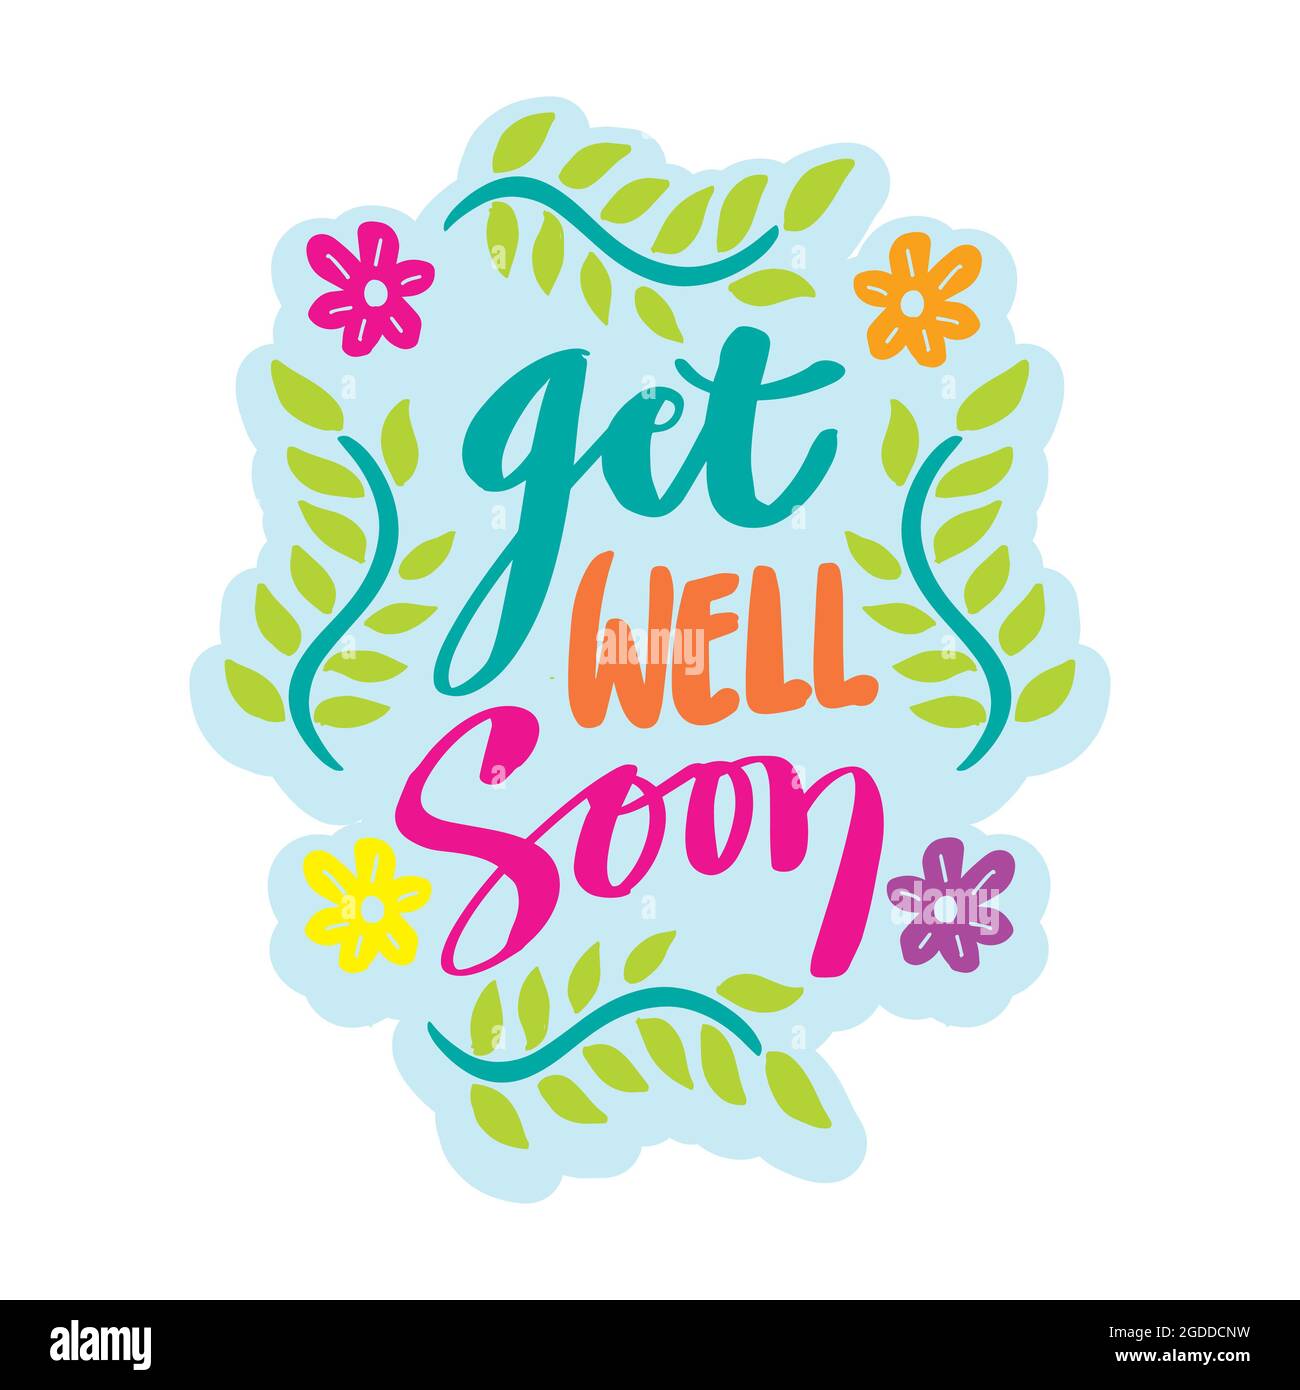 Get well soon hand lettering with cute bear. Motivational quote Stock Photo  - Alamy